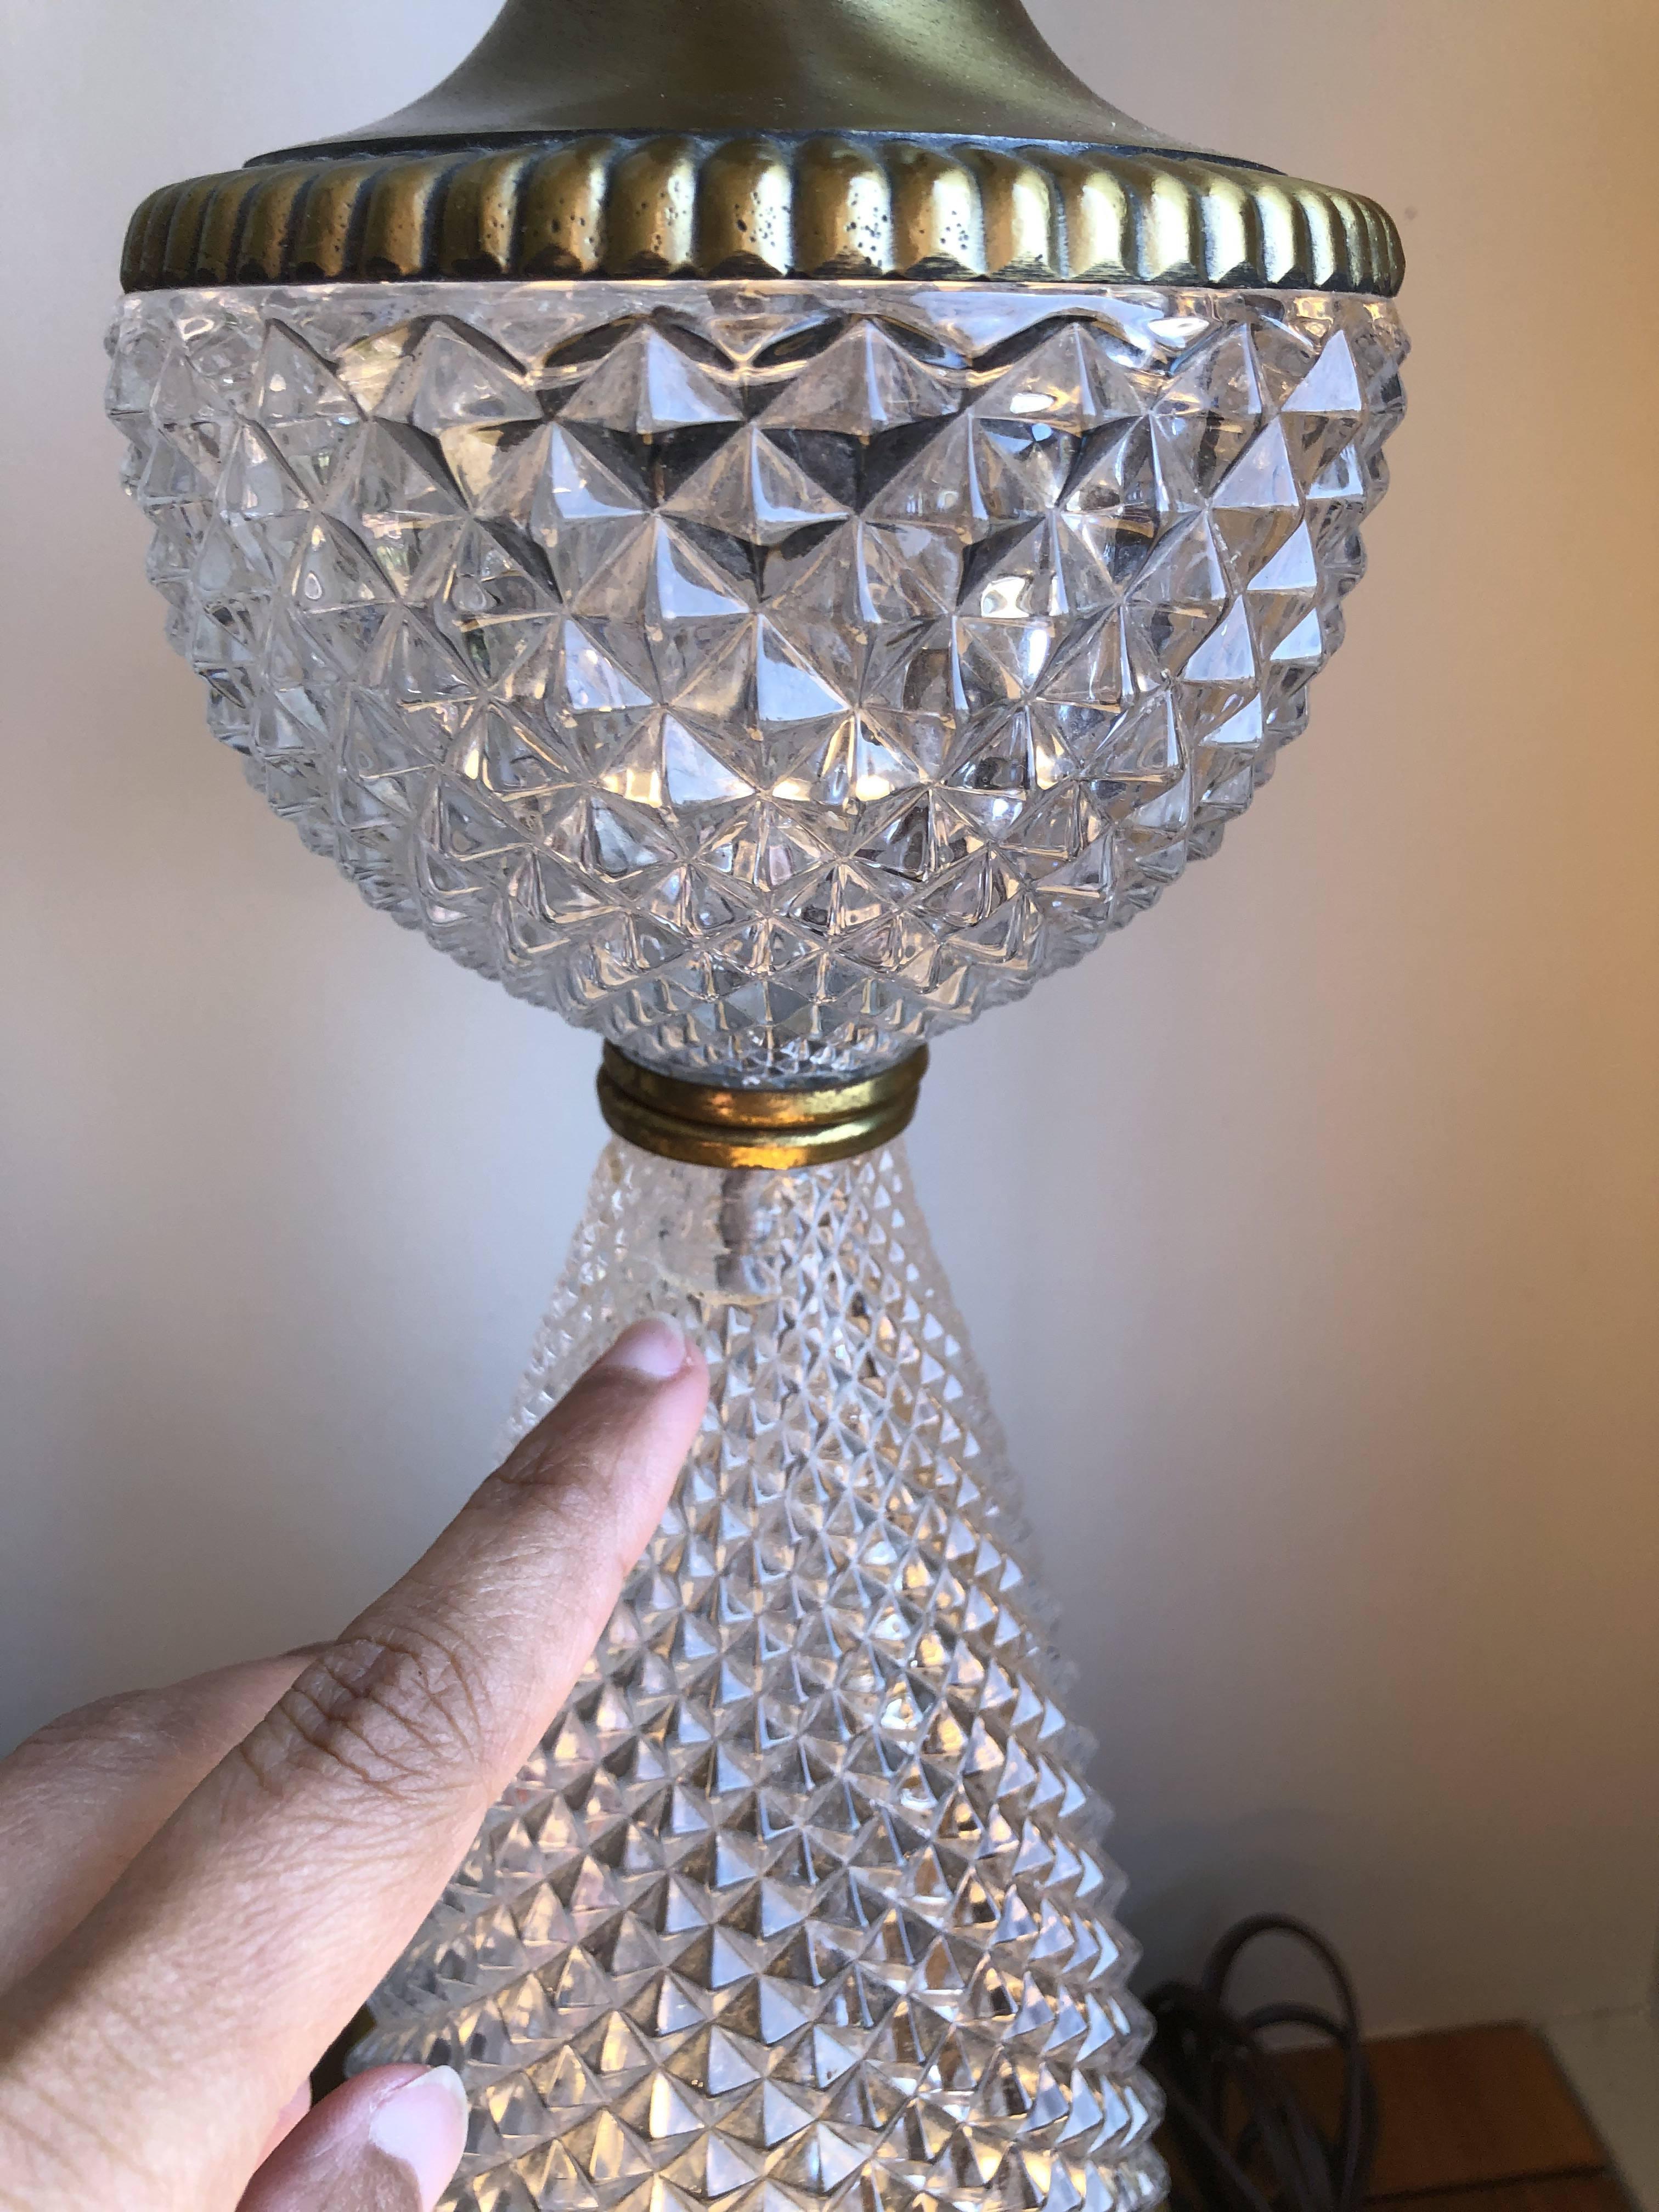 Beautiful pair of Italian crystal lamps. Solid and heavy as the crystal sits on a brass base. Original finials and cords. Excellent working condition. 

Dimensions: 6